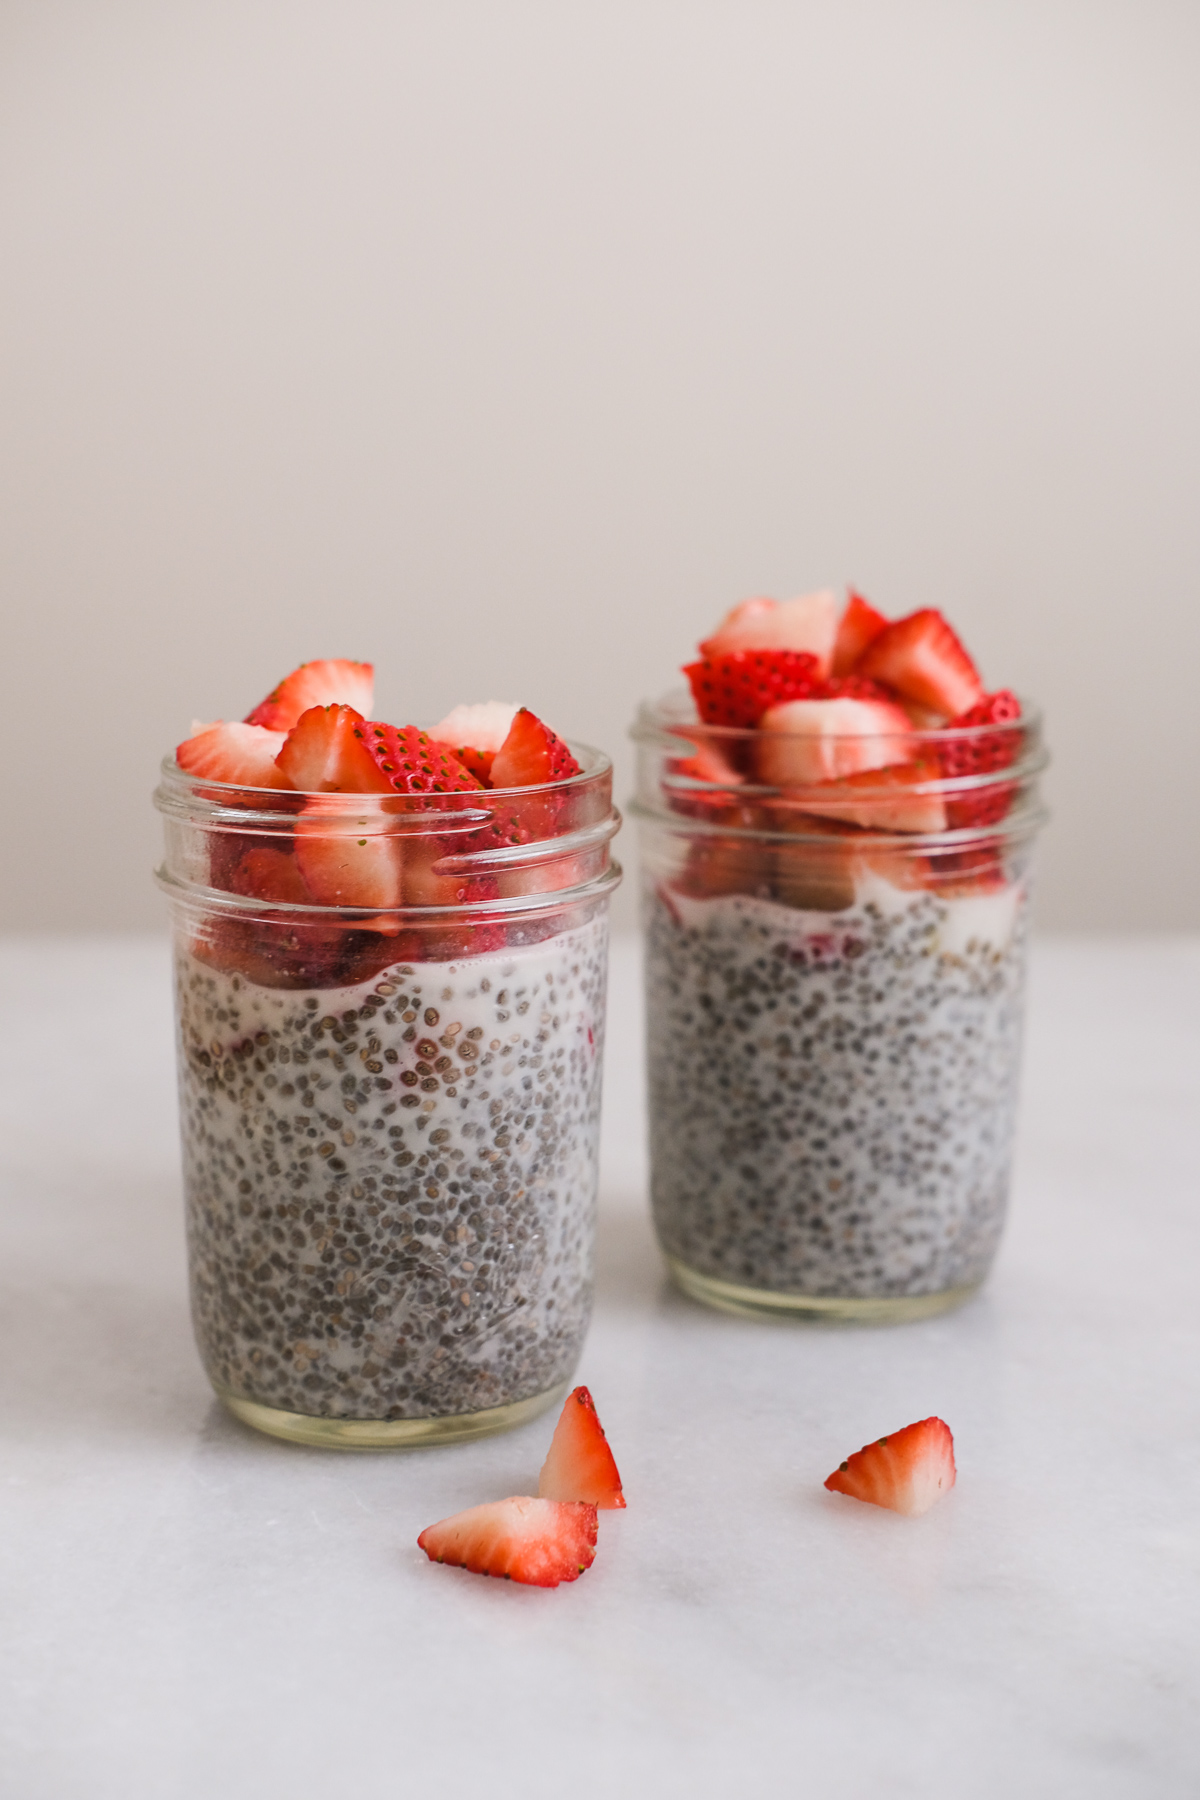 Fast Chia Seed Pudding (ready in 5 minutes)